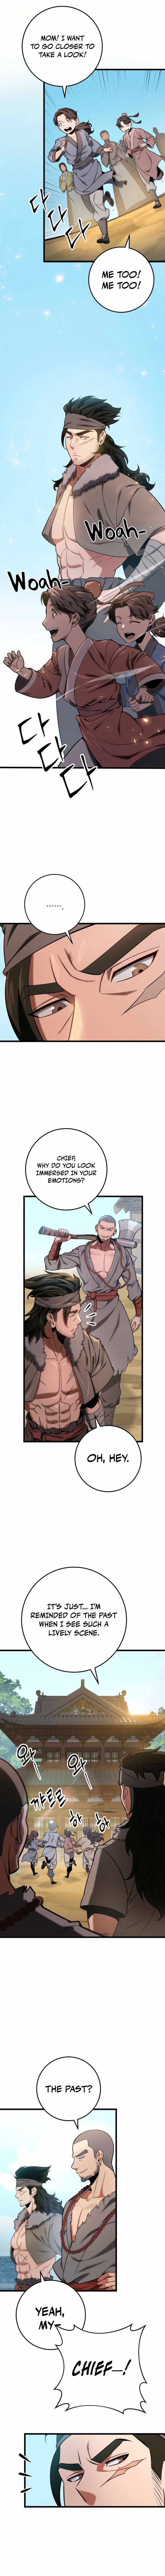 Heavenly Inquisition Sword chapter 17